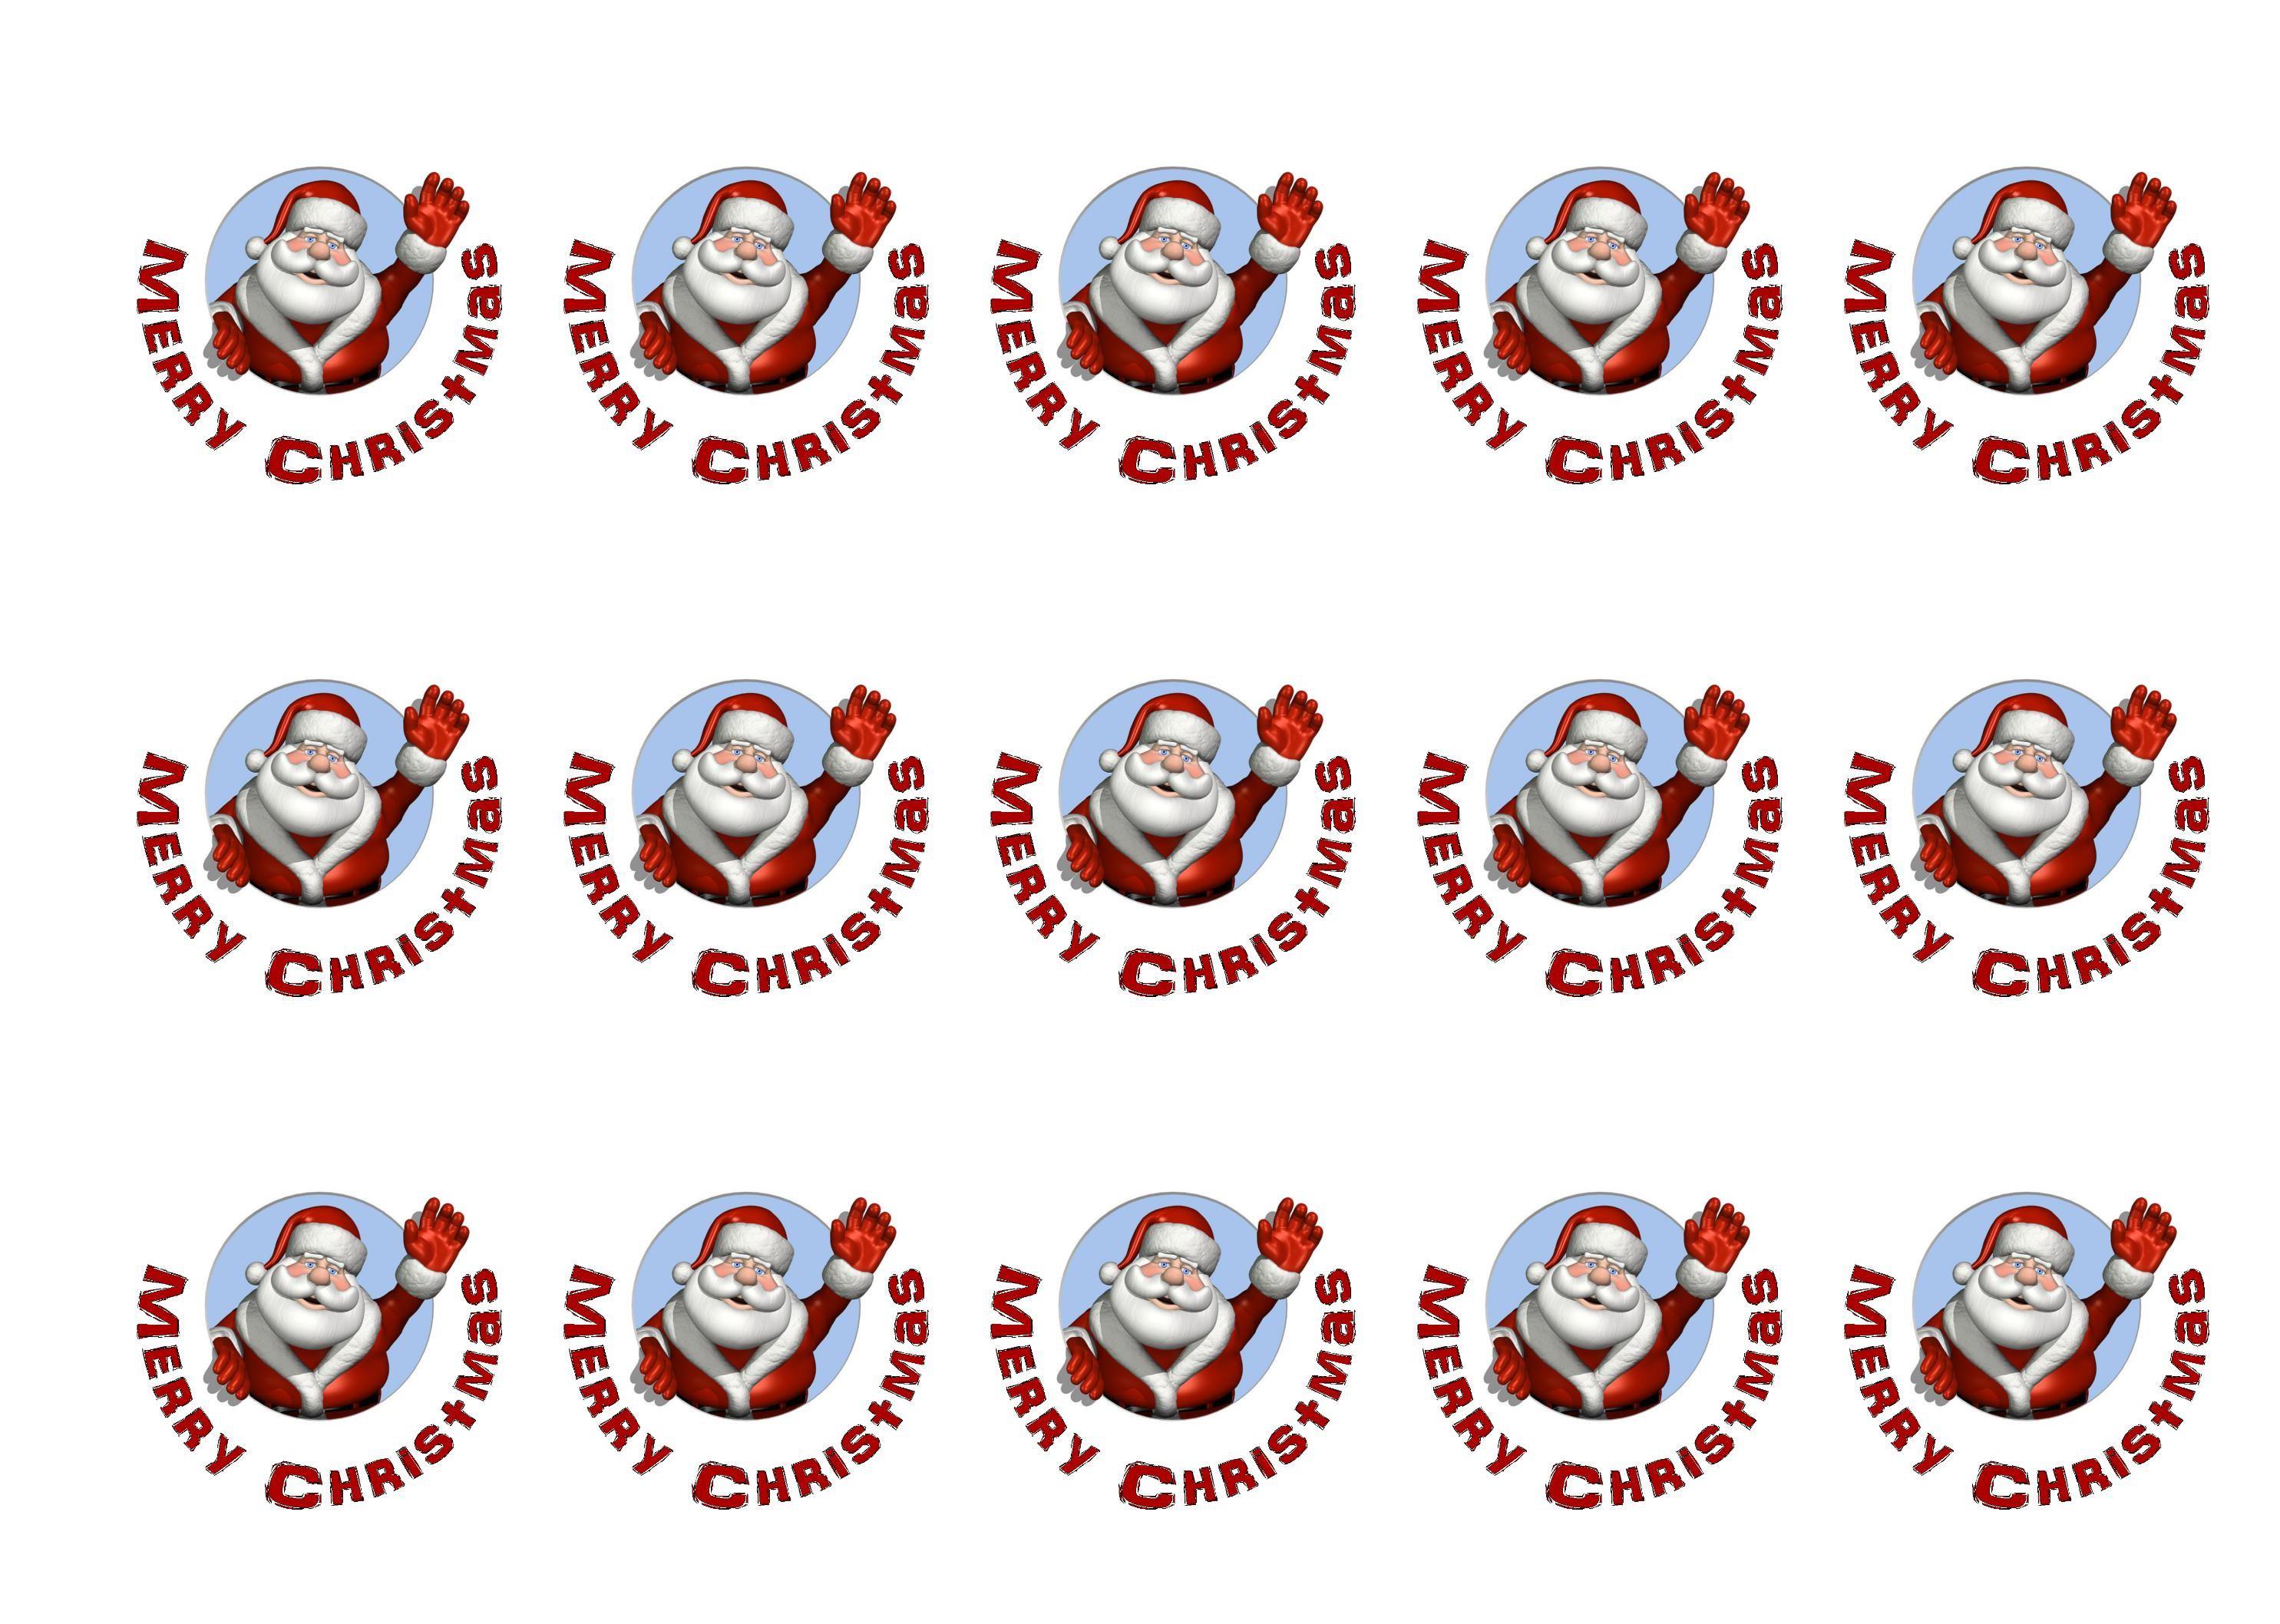 Edible cupcake toppers with Santa image printed on rice paper or icing